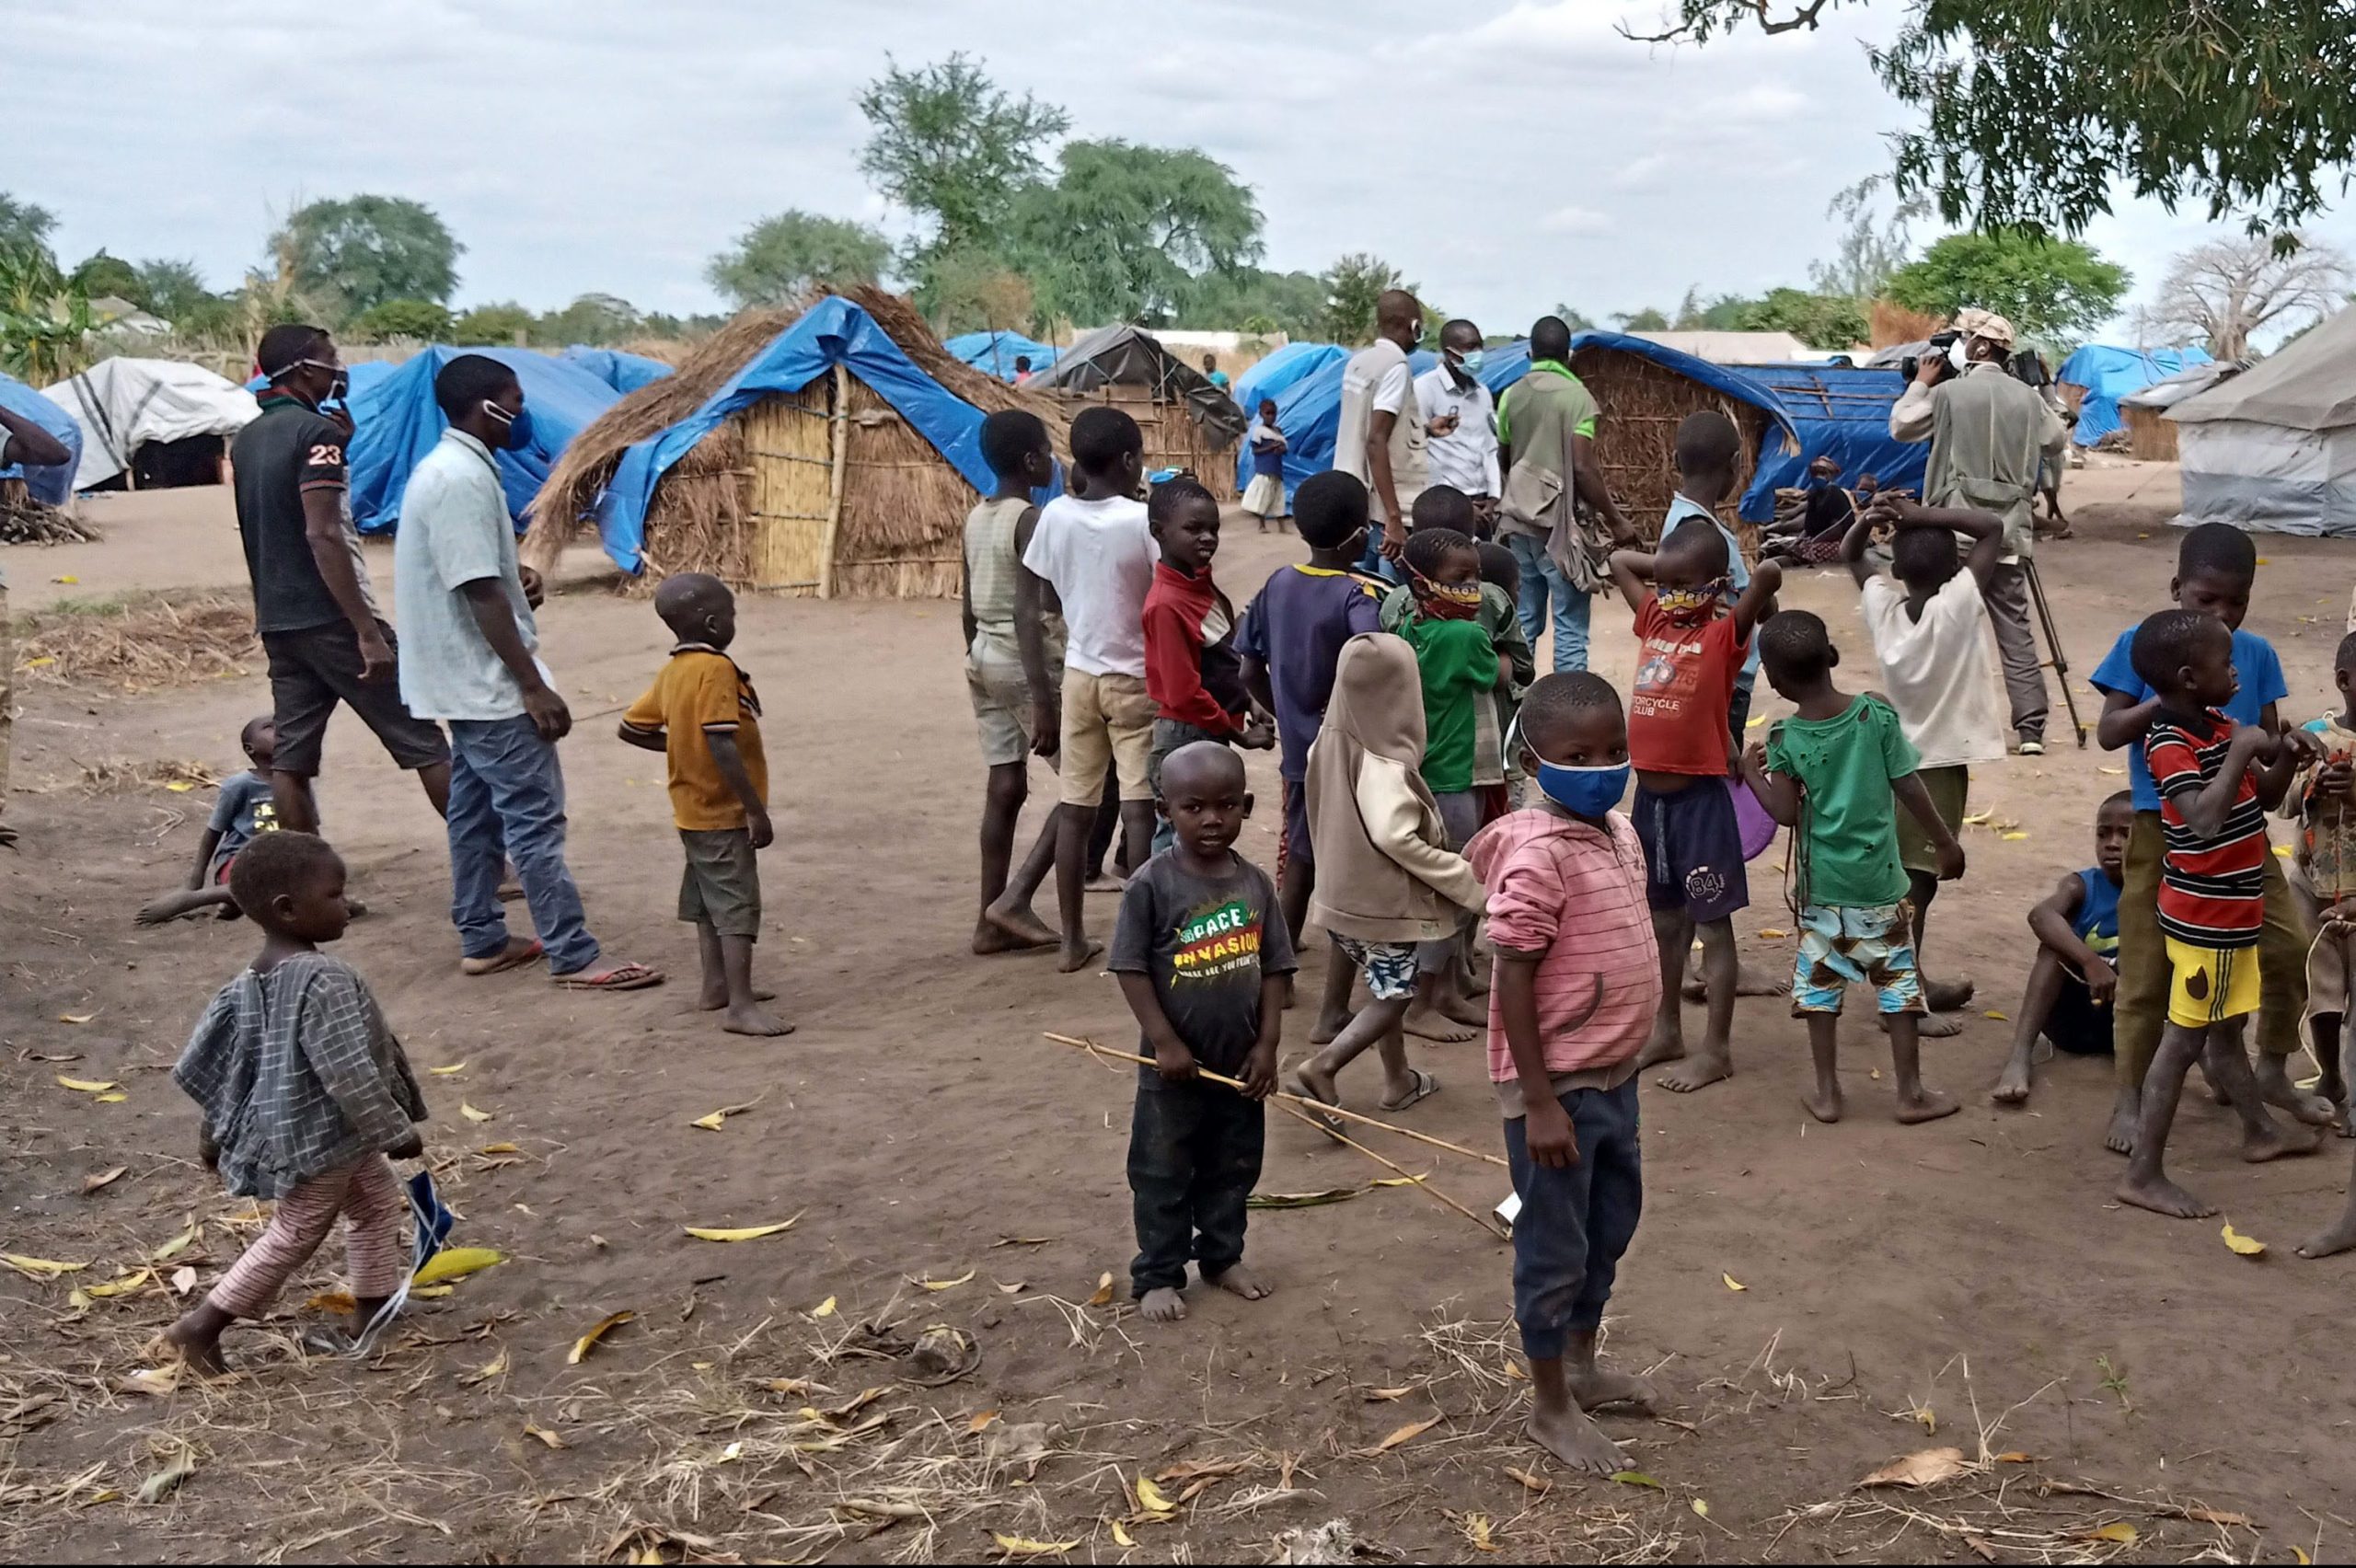 Image of families who fled Mocímboa da Praia, Cabo Delgado province, Mozambique after it was attacked by Al Sunnah wa Jama’ah on 26th June 2020 (Credit: Aid to the Church in Need)